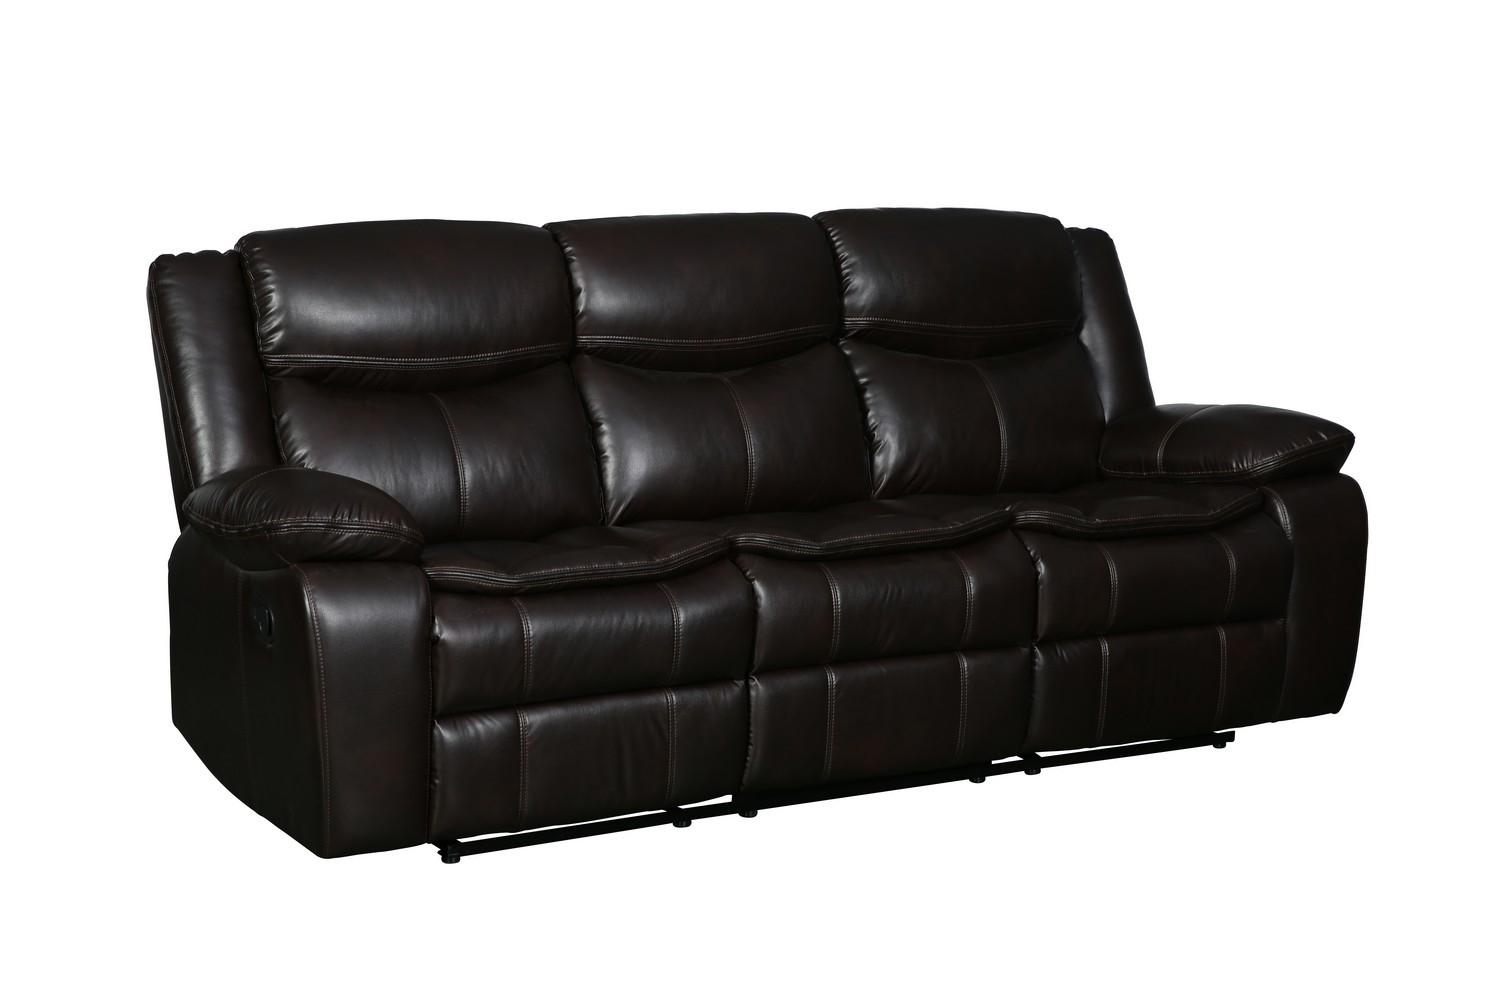 Contemporary Reclining Sofa 6967 Reclining Sofa 6967-BROWN-S 6967-BROWN-S in Brown leather Air